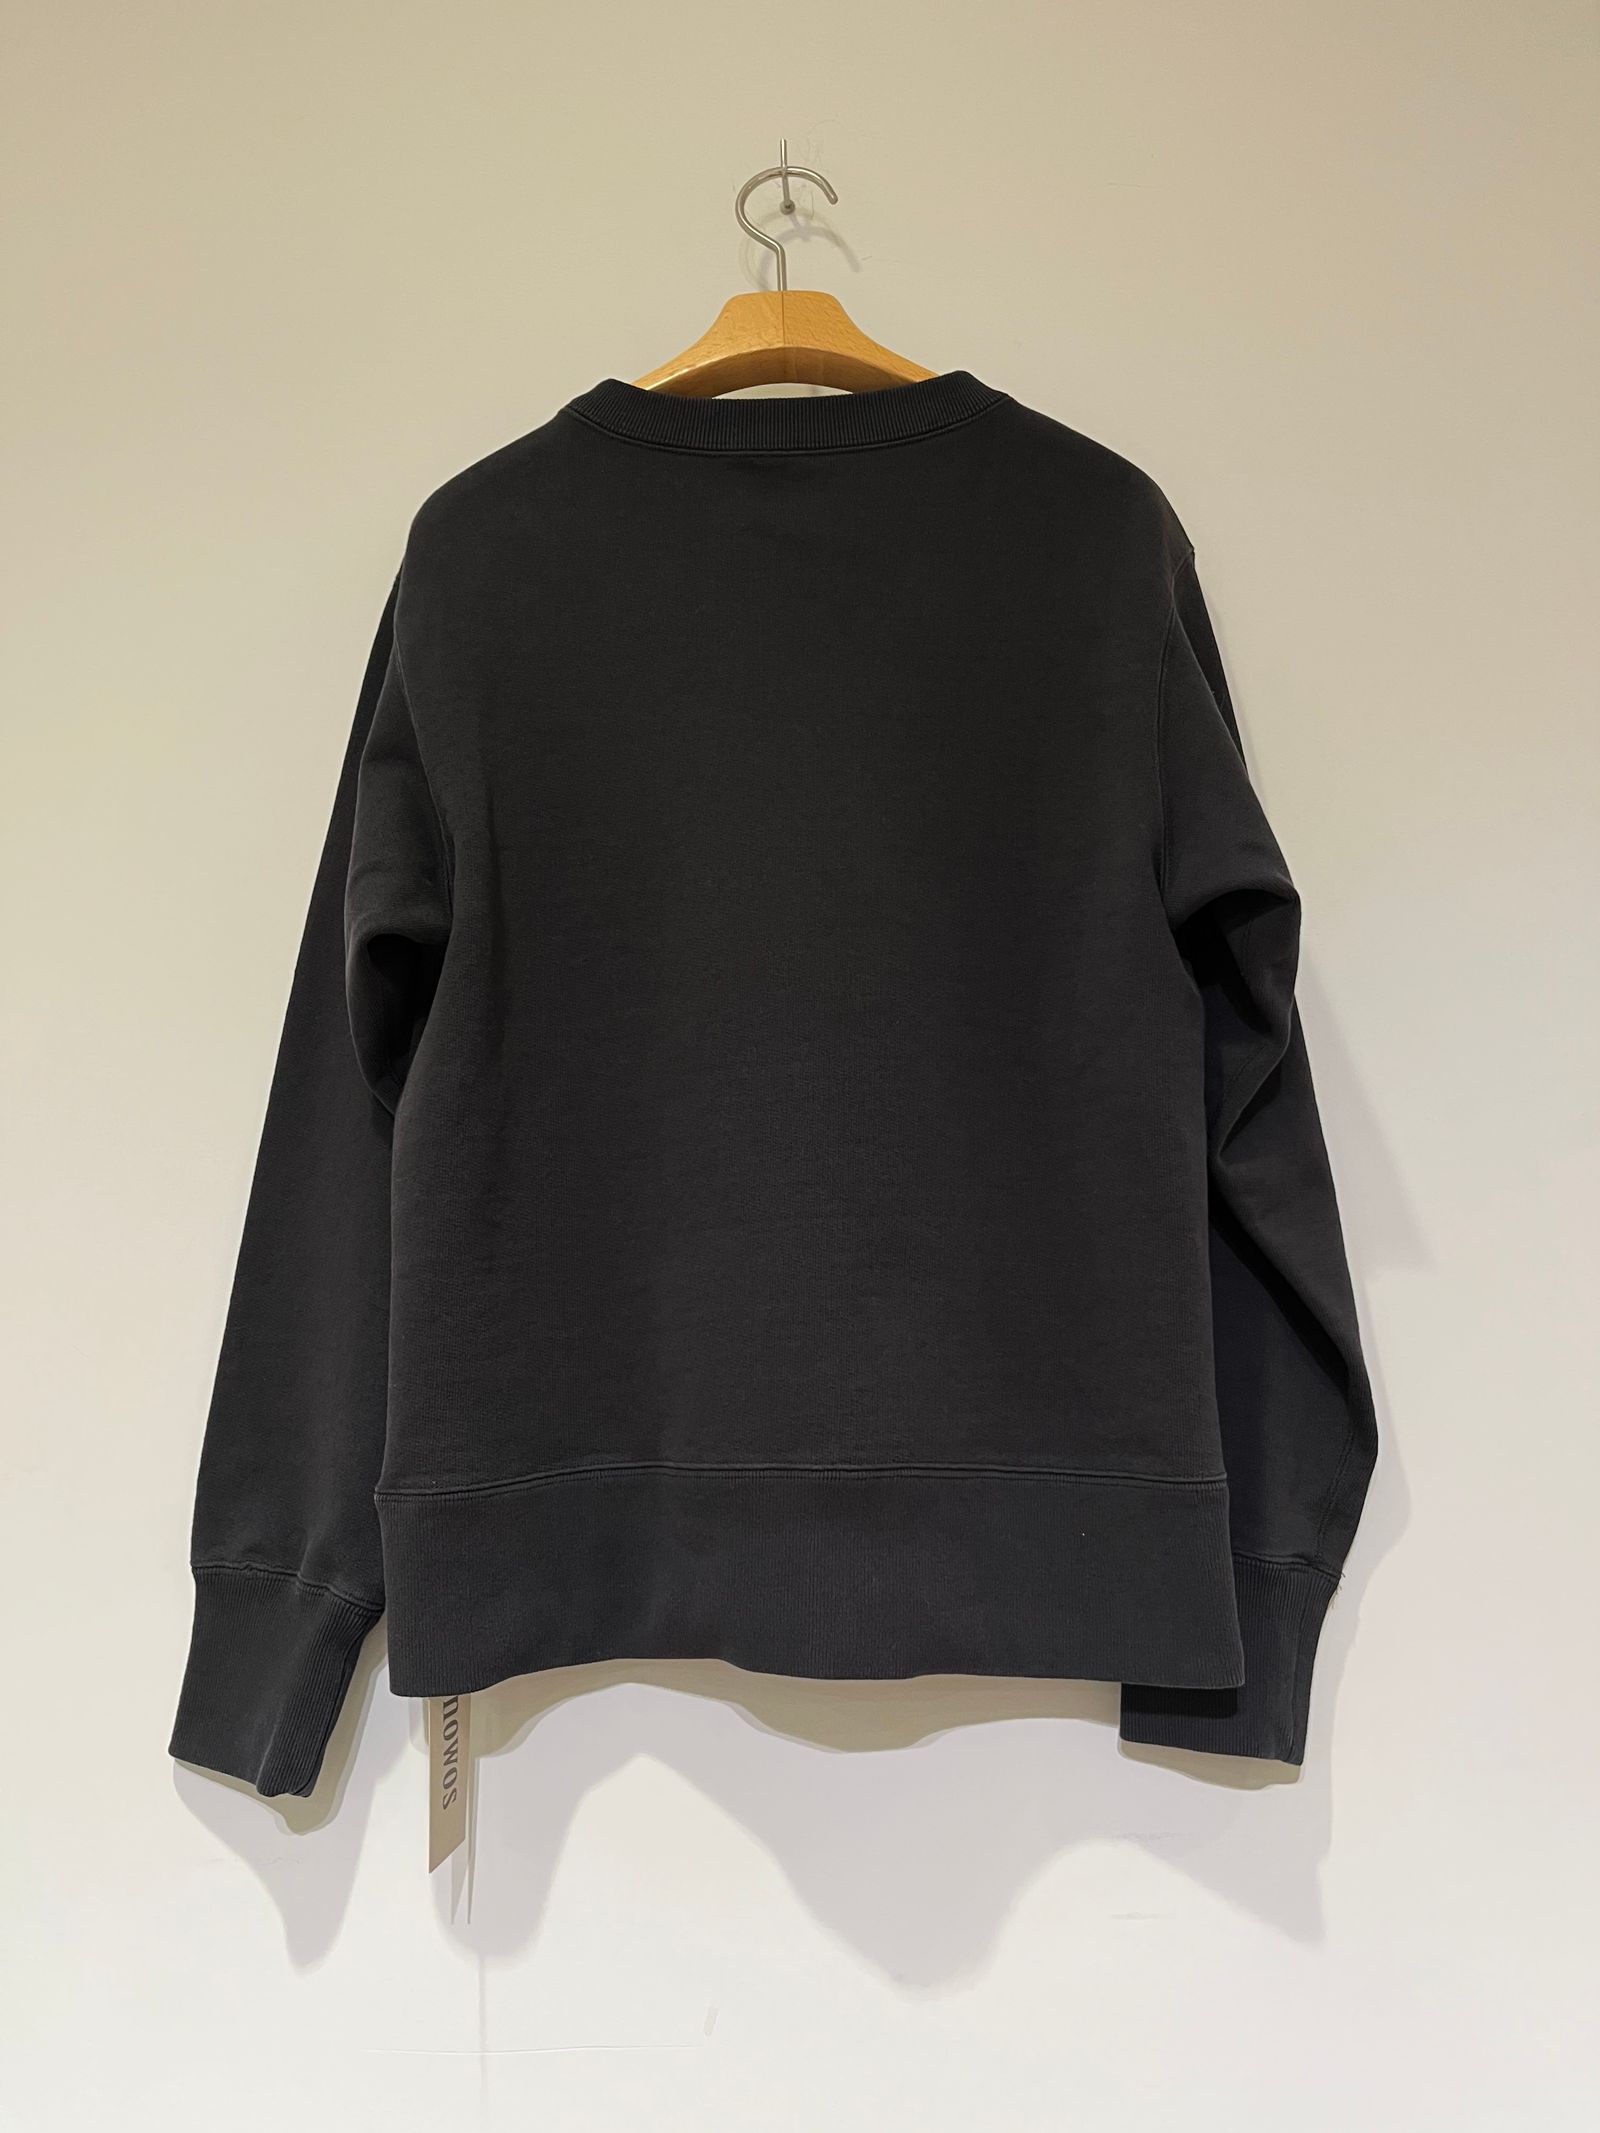 nowos - Printed Sweat Shirt nowos ノーウォス ロゴスウェット